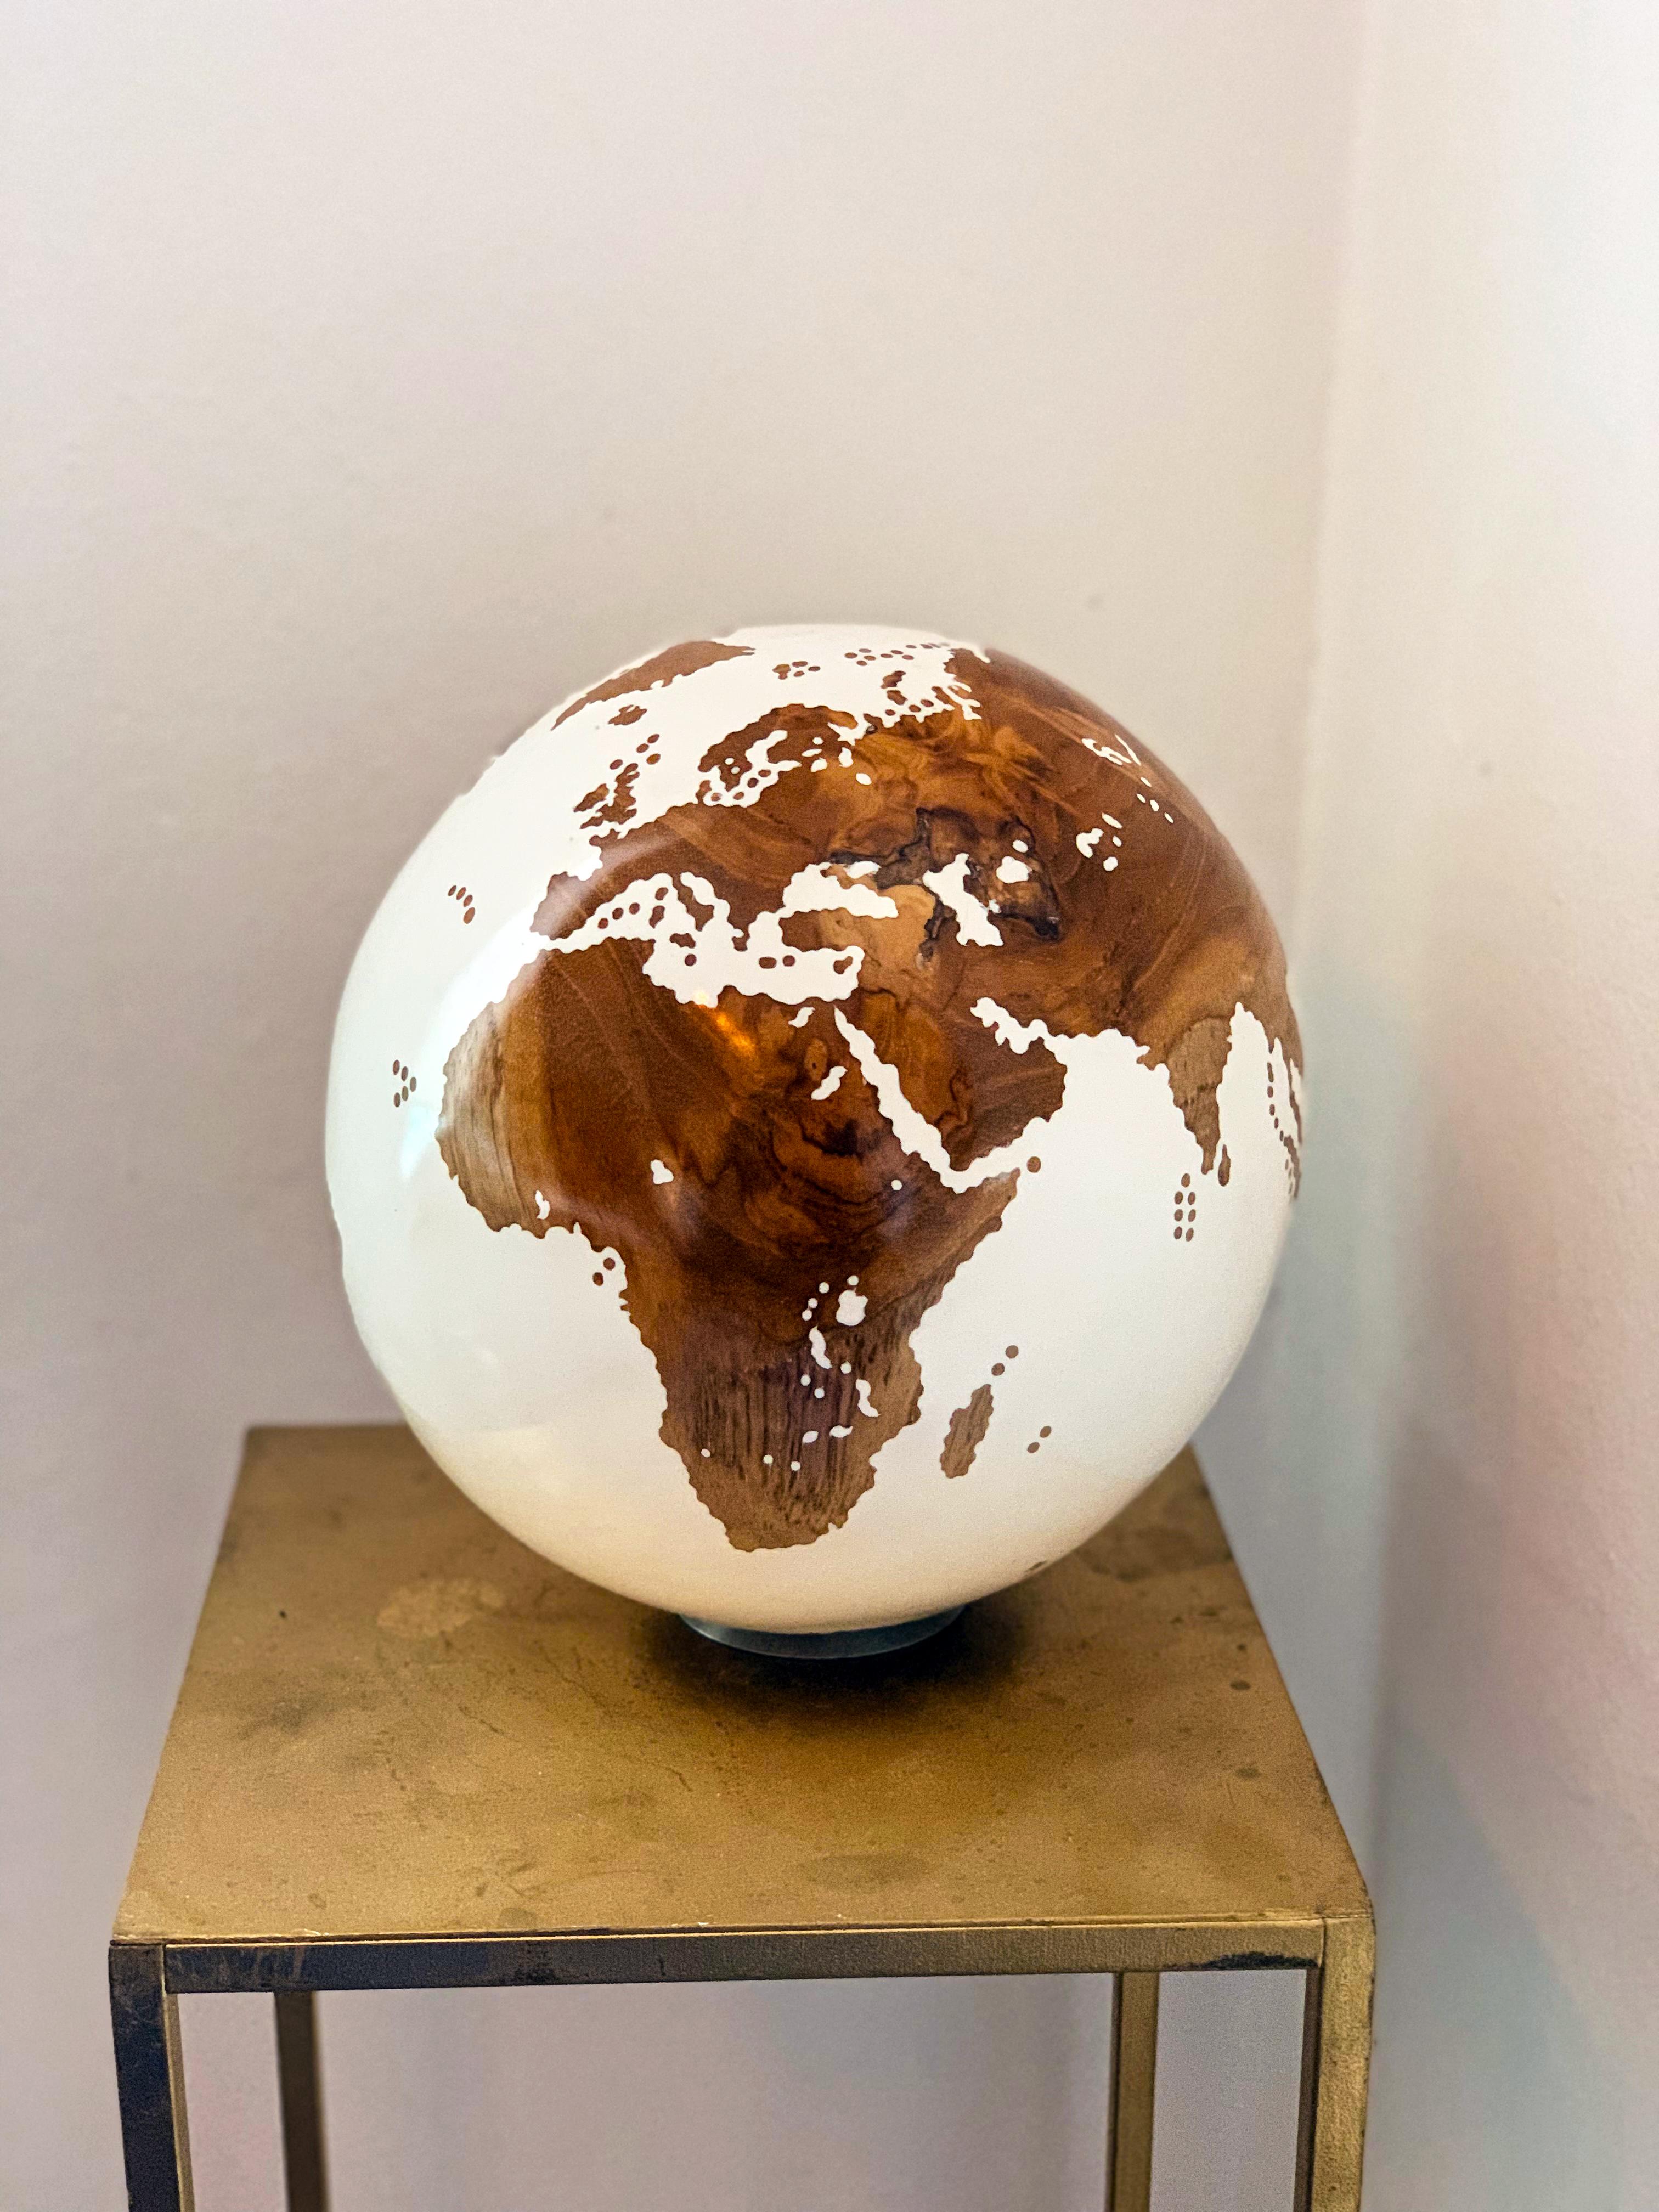 Original globe made out of teak wood, countries are carved out of the wood, then the water is finished in white.

As the shape of the wood, texture and color is unique, so is this elegant sculpture. Signed, dated and numbered.

Turns on base.